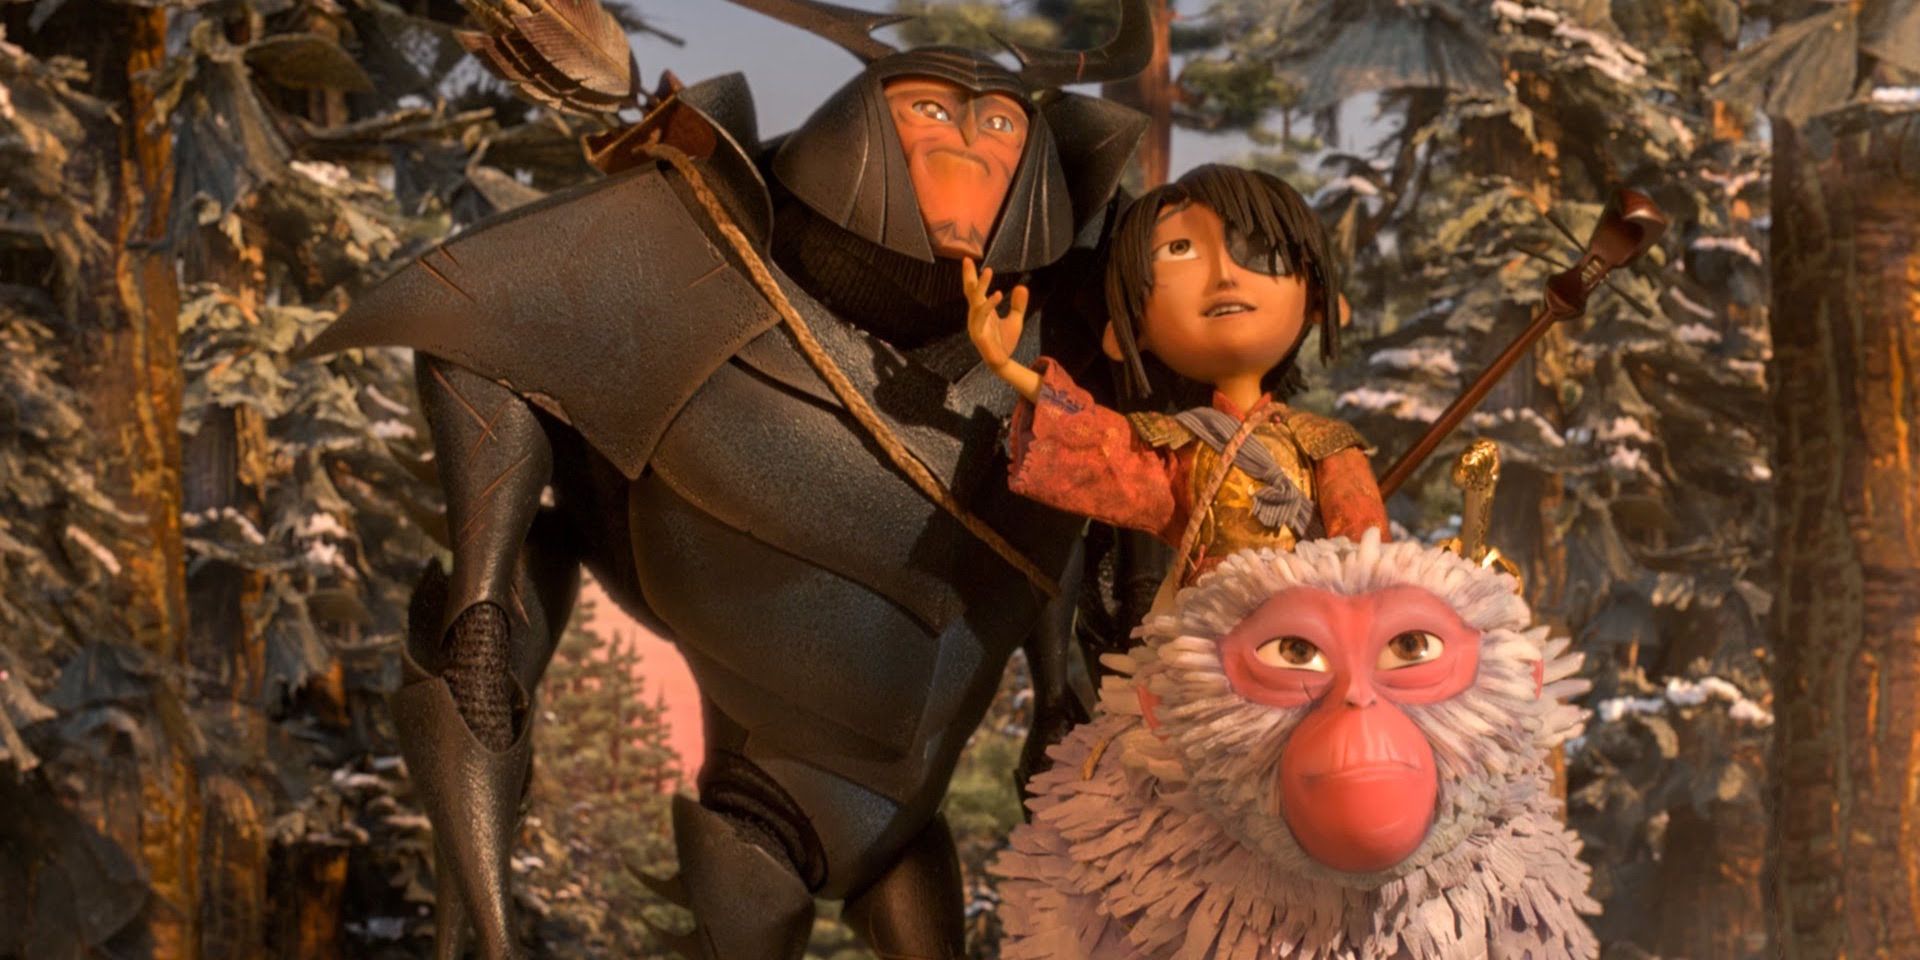 Beetle, Kubo, and Monkey in Kubo and the Two Strings